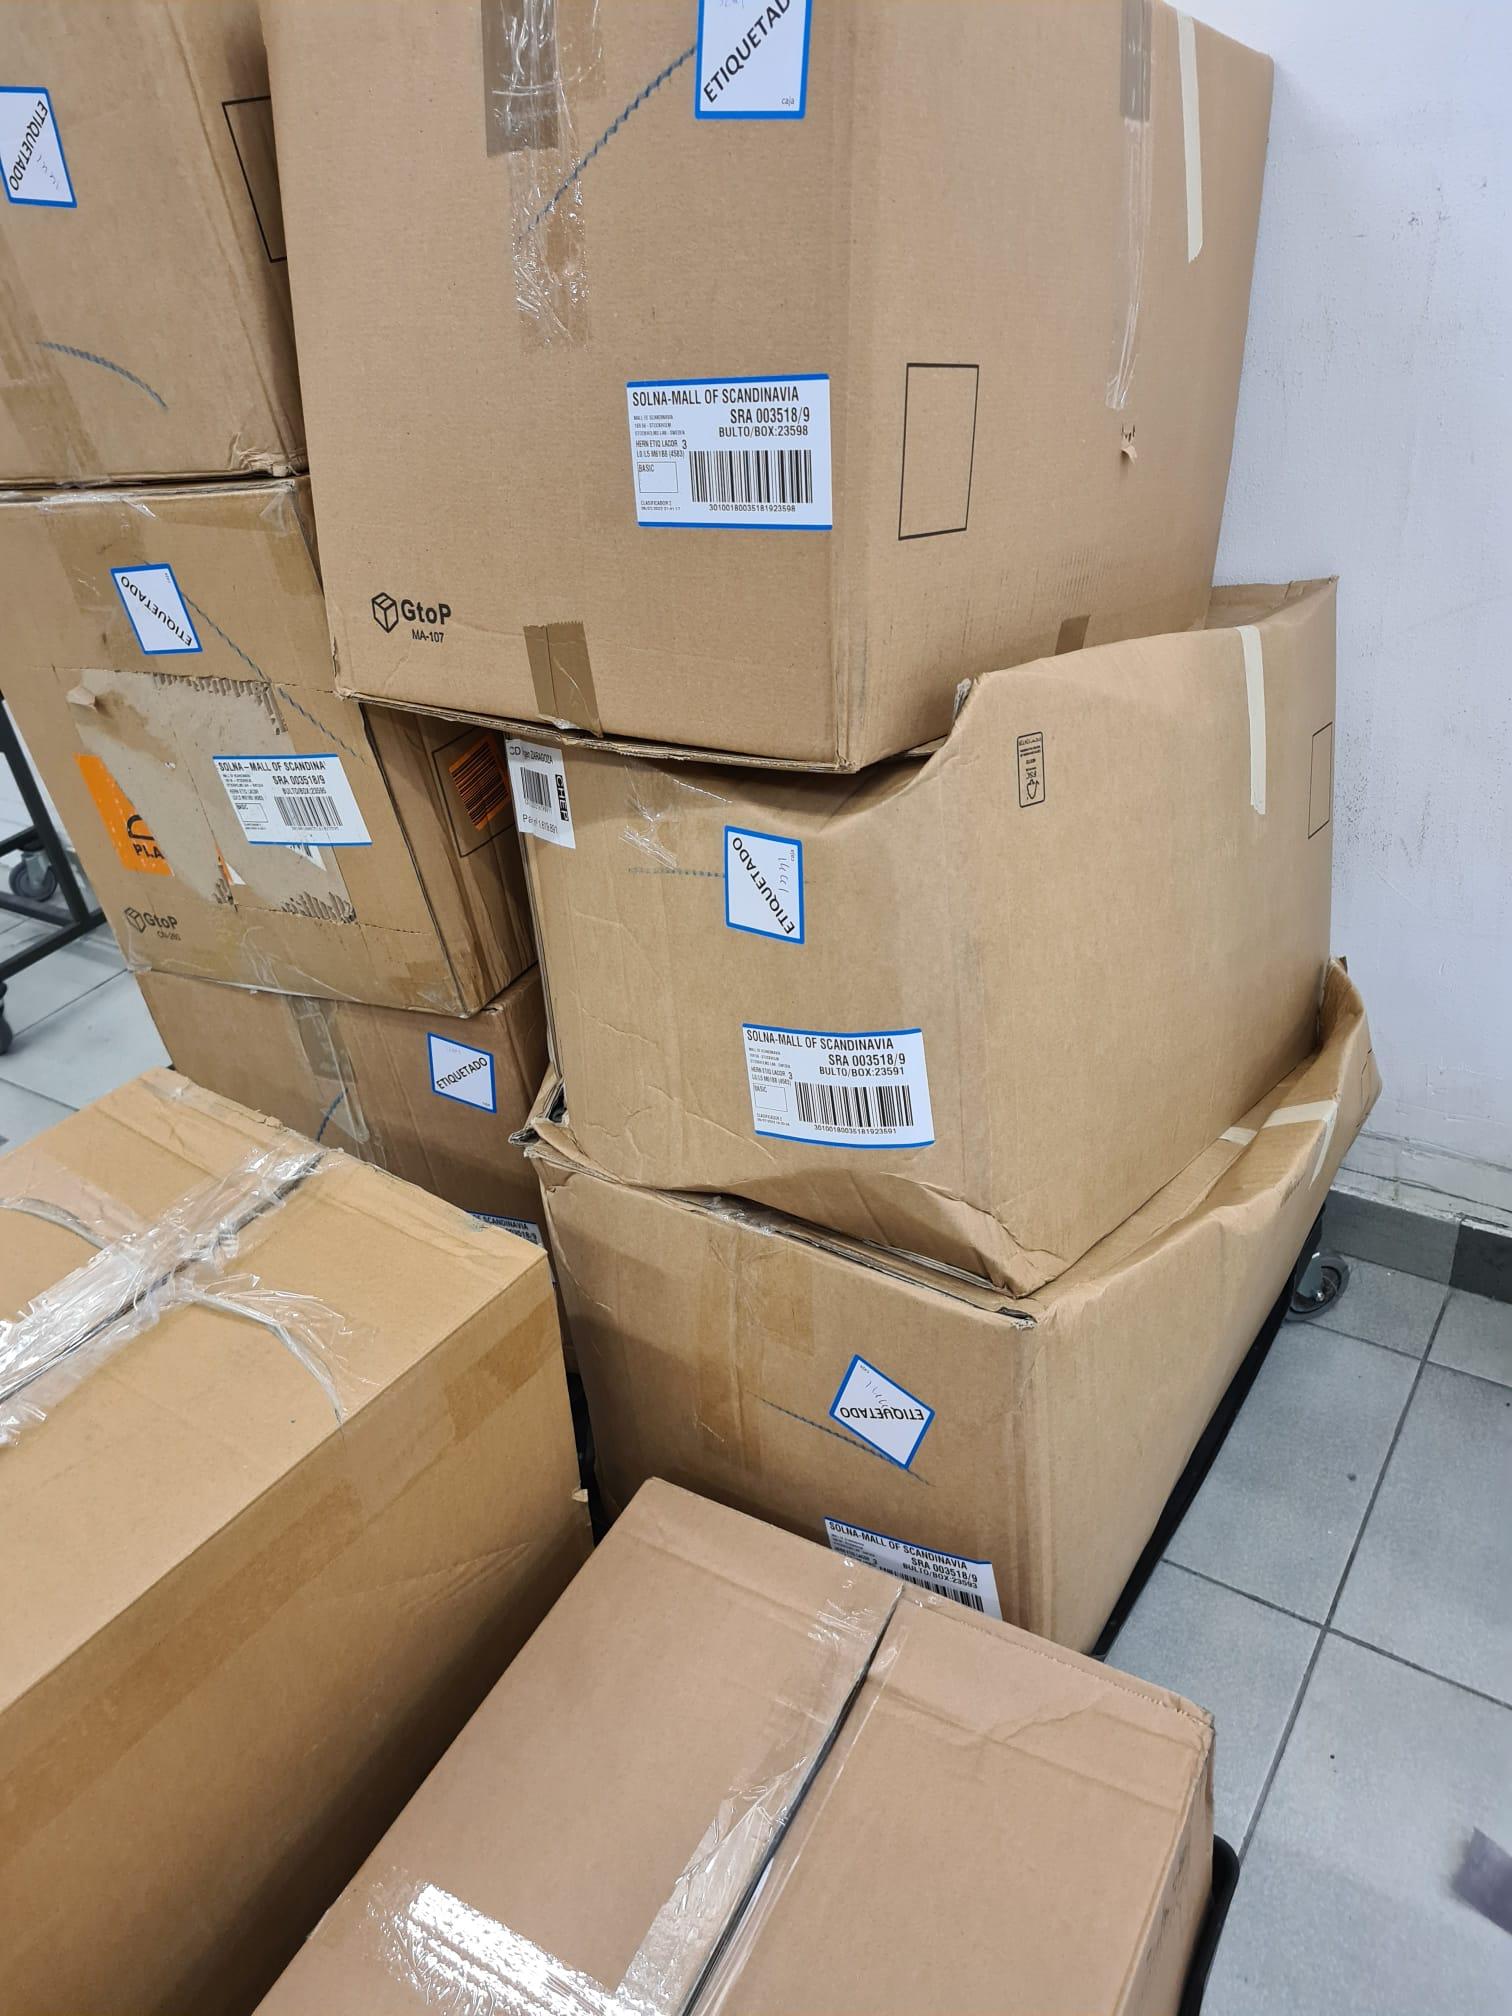  Una Subotic suffered a severe work injury to her back when she was unpacking boxes like these with clothes in Zara's warehouse at Mall of Scandinavia.